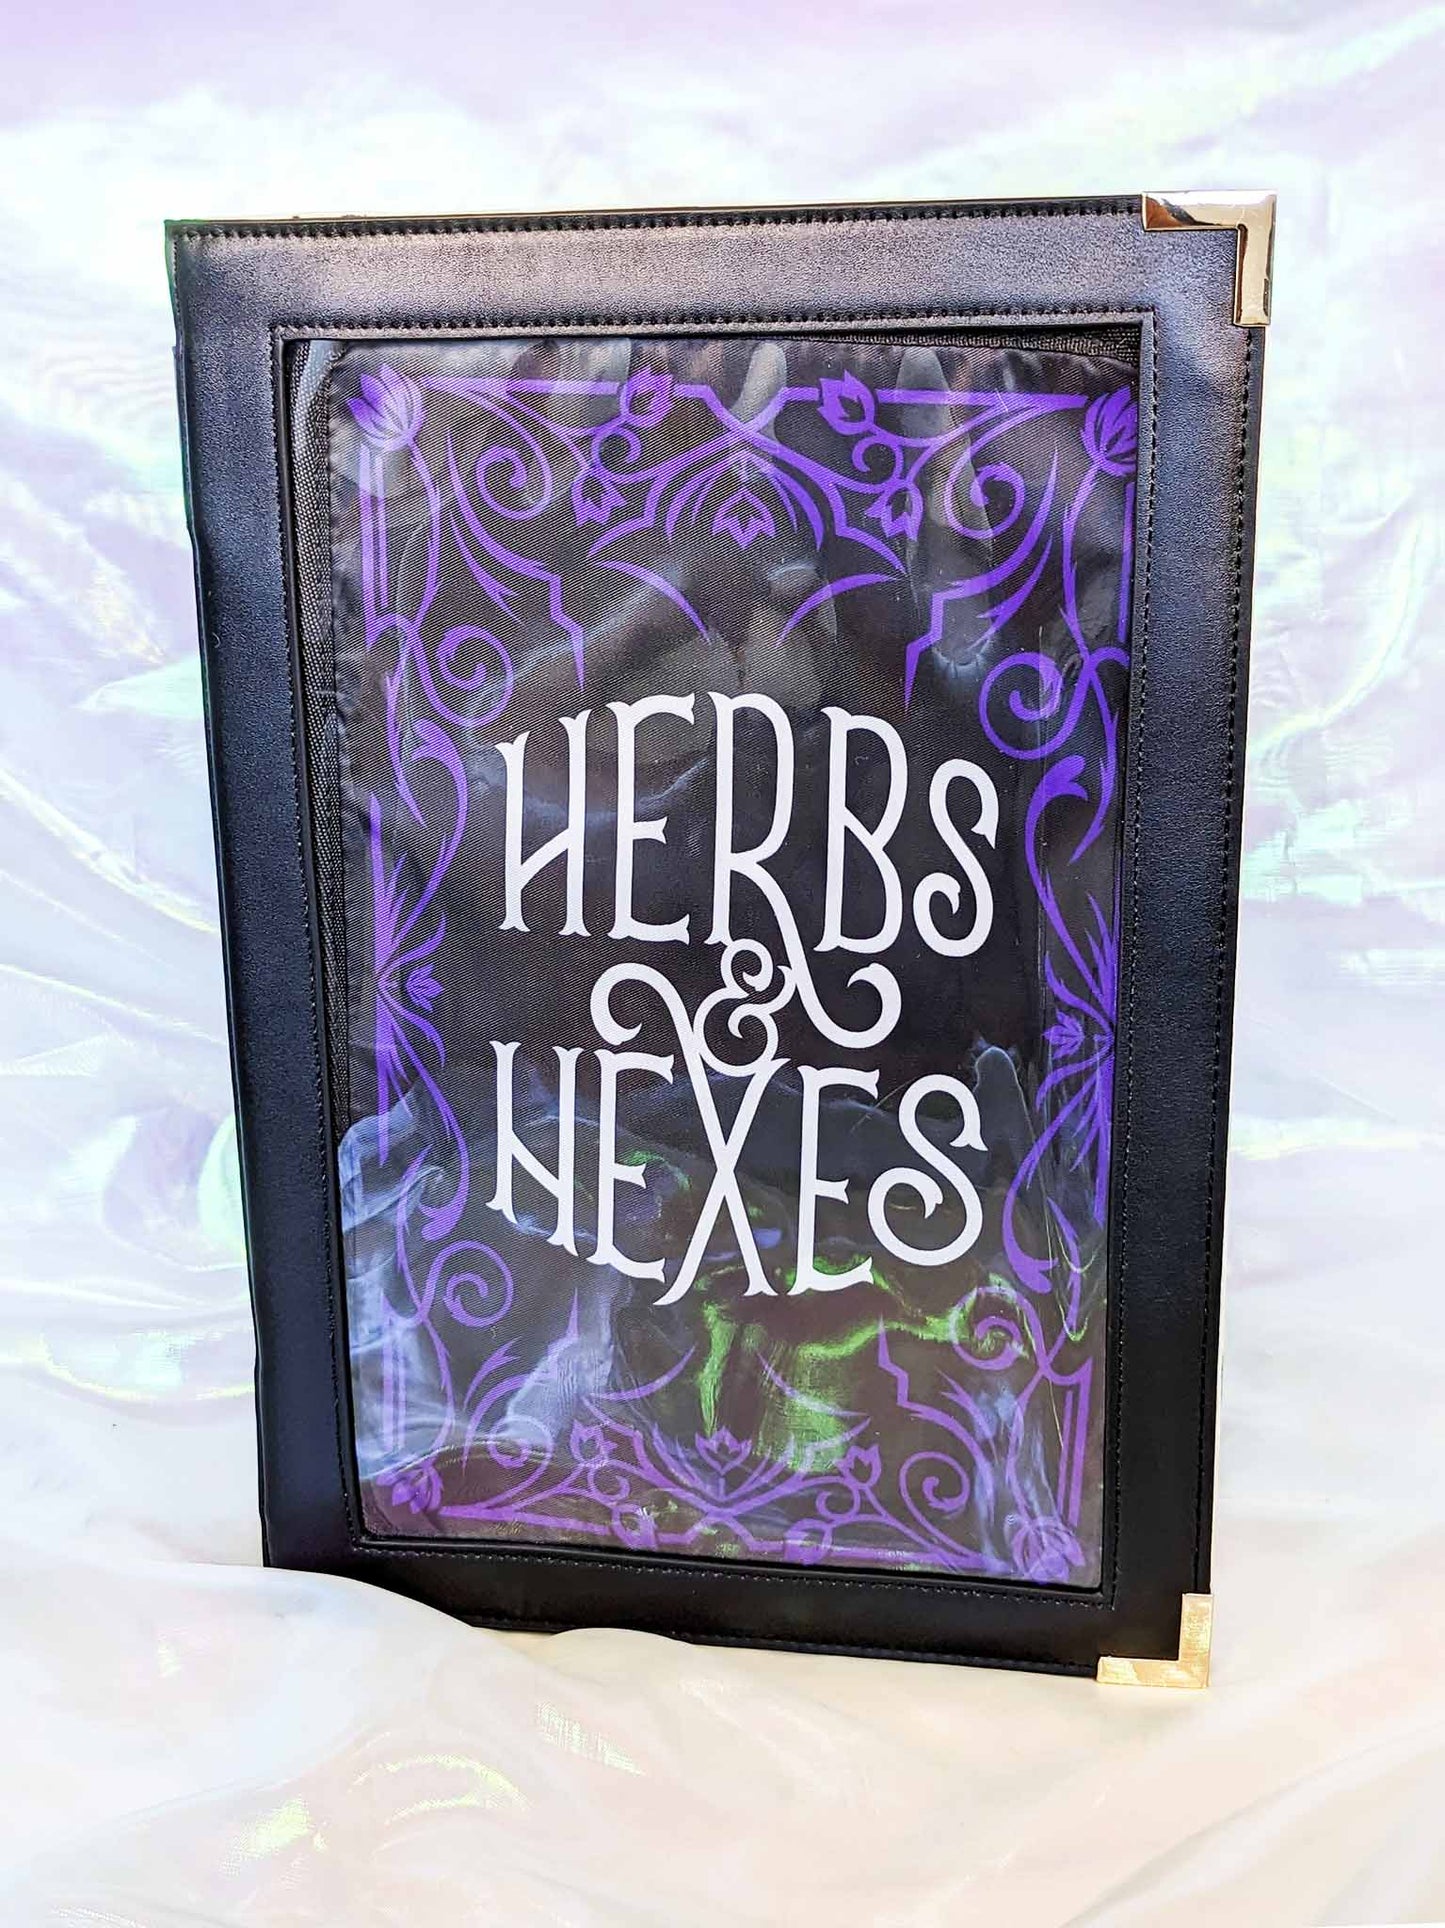 Bookish Ita Messenger Laptop Bag Backpack in Witchy Black Purple Herbs and Hexes